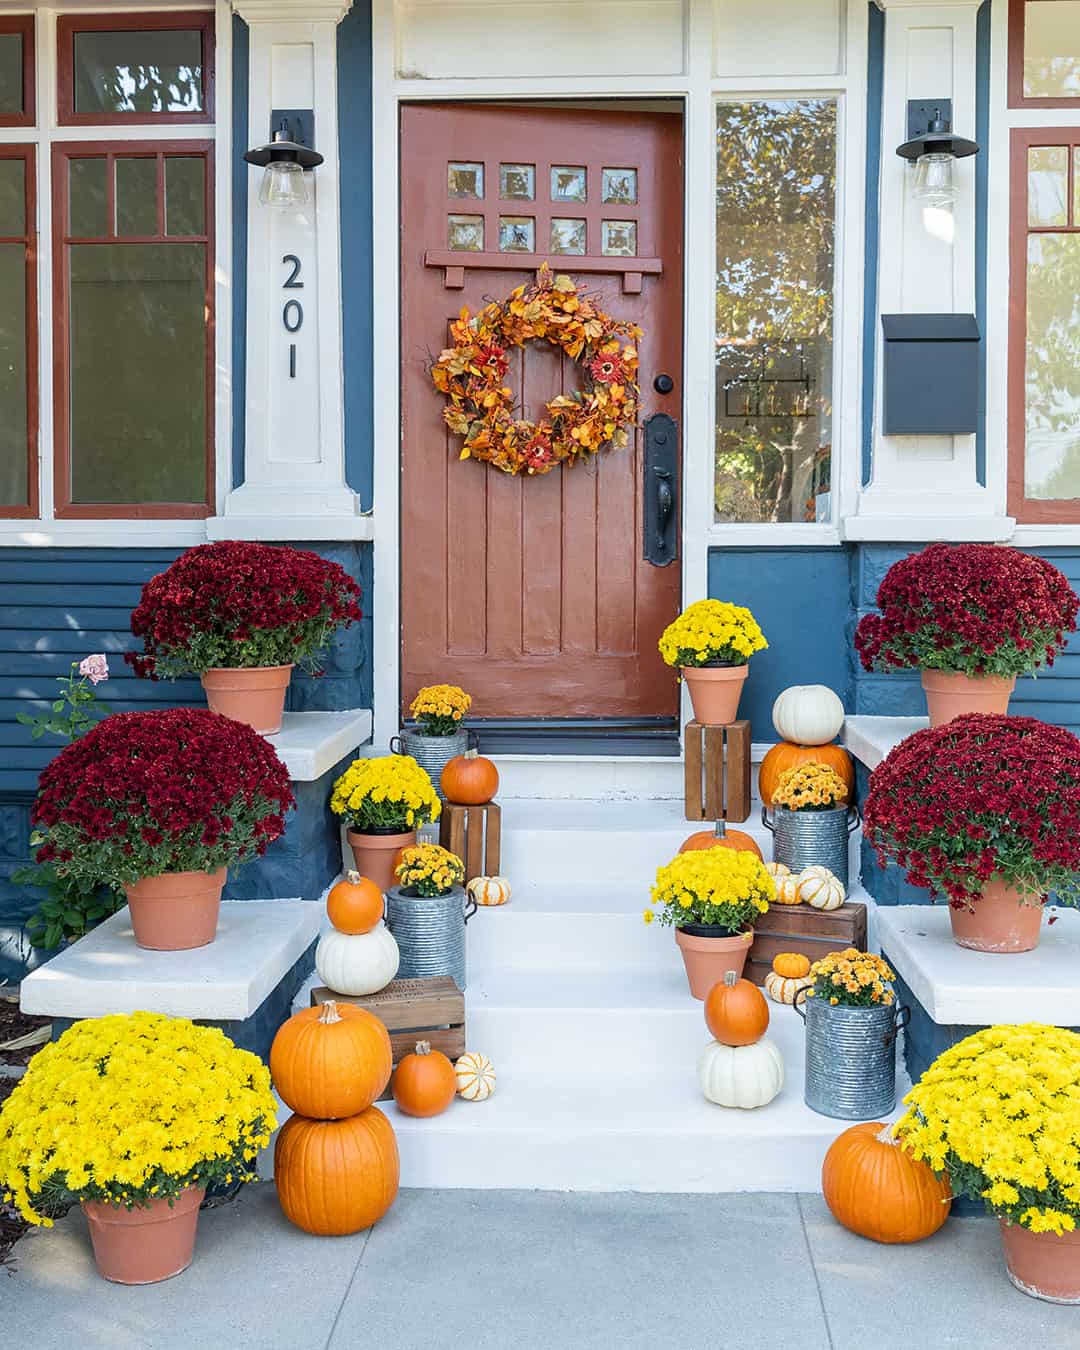 Tiered Fall Decorations on the Steps